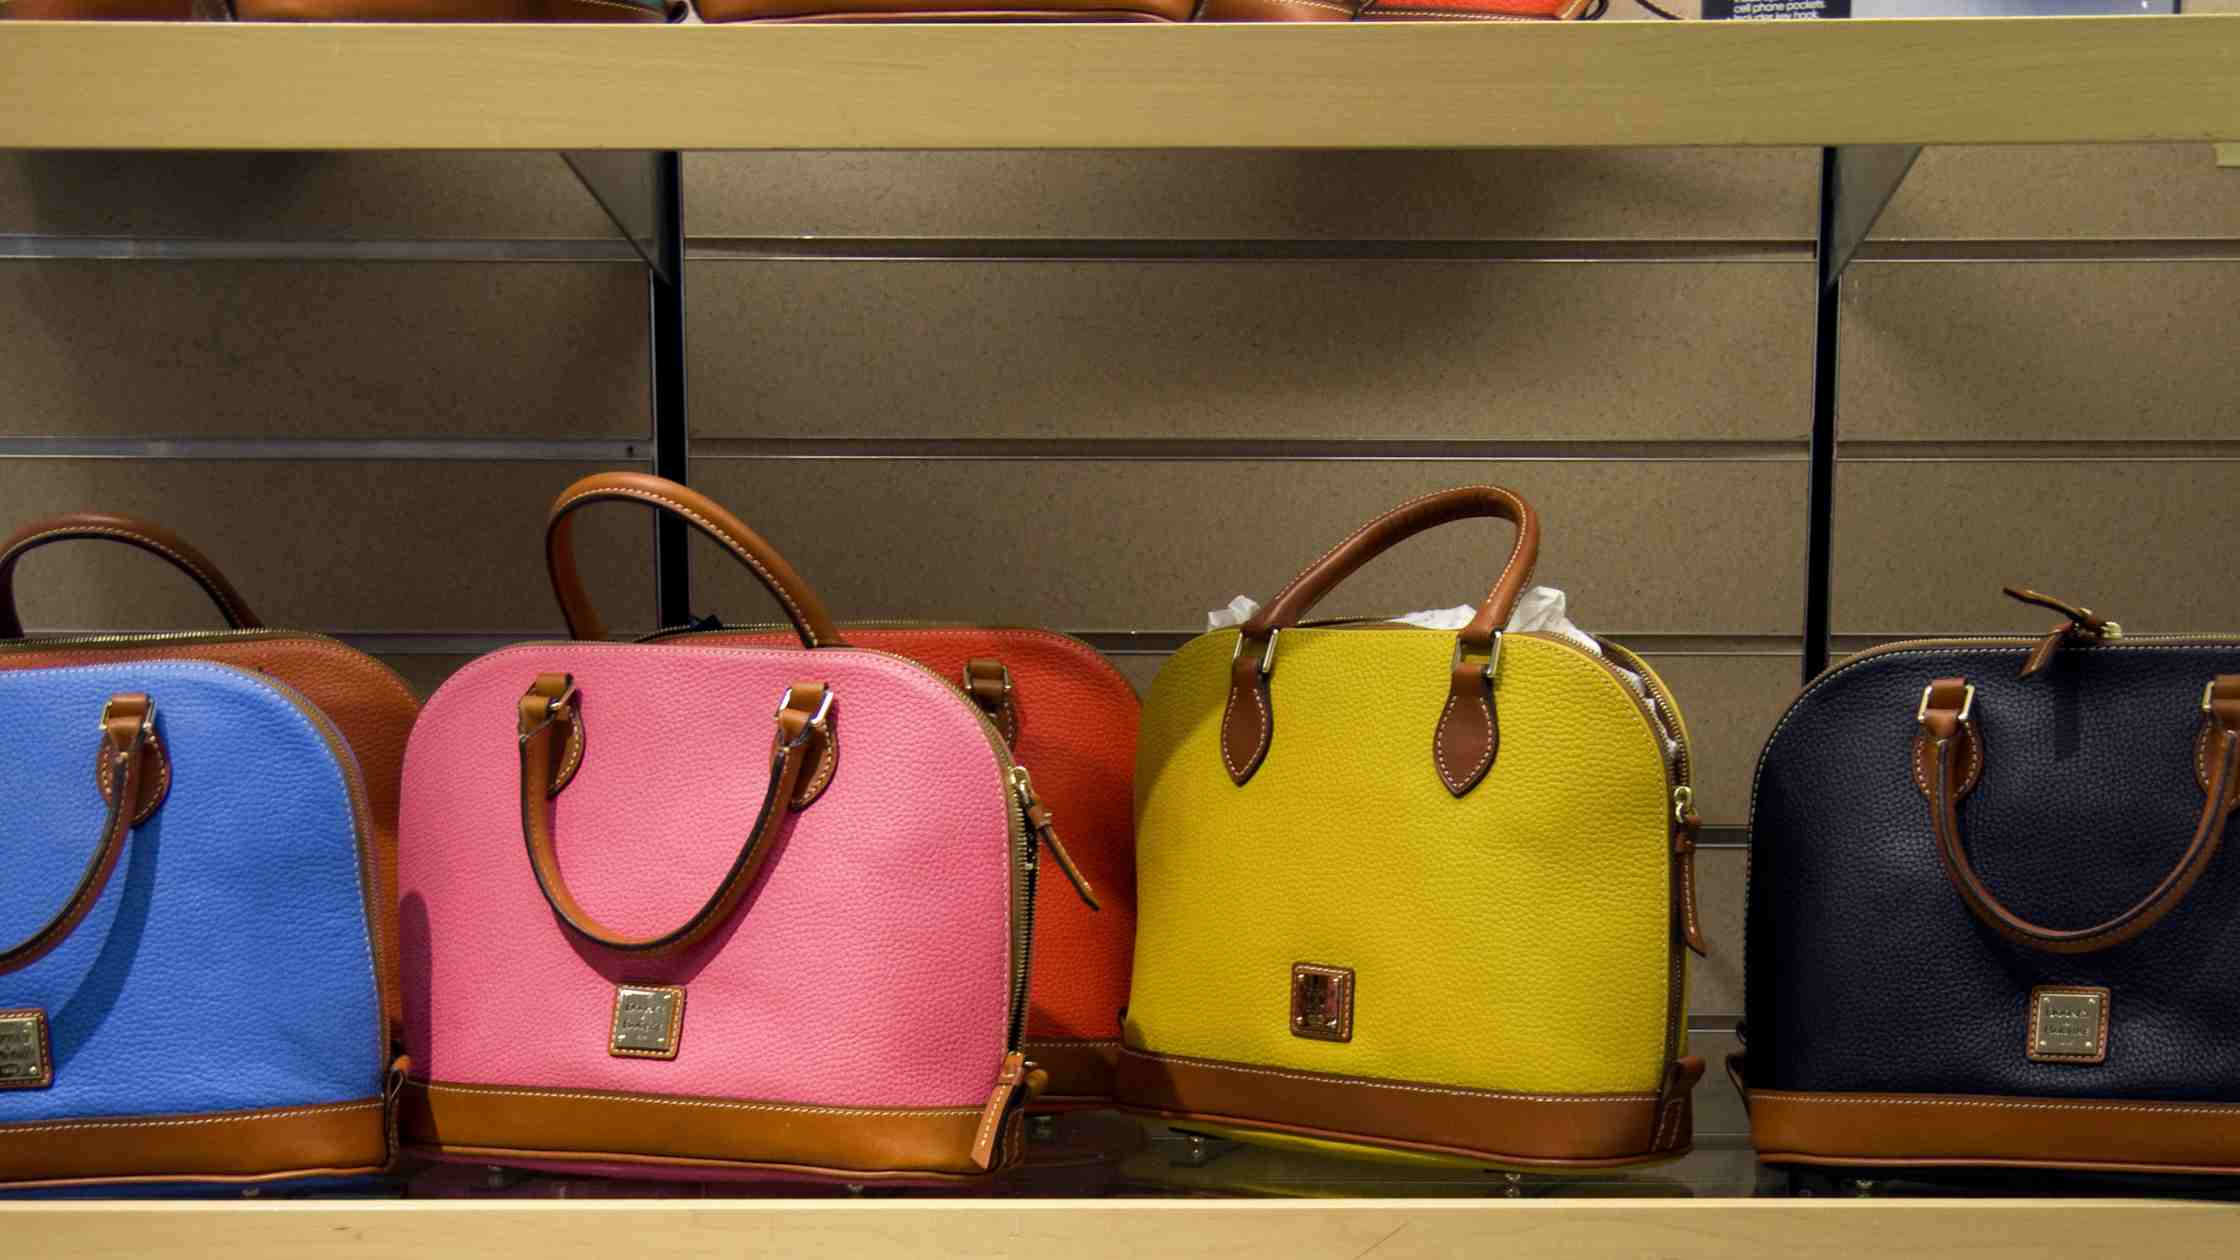 Dooney and Bourke Discontinued Handbags - Where these for Sale?